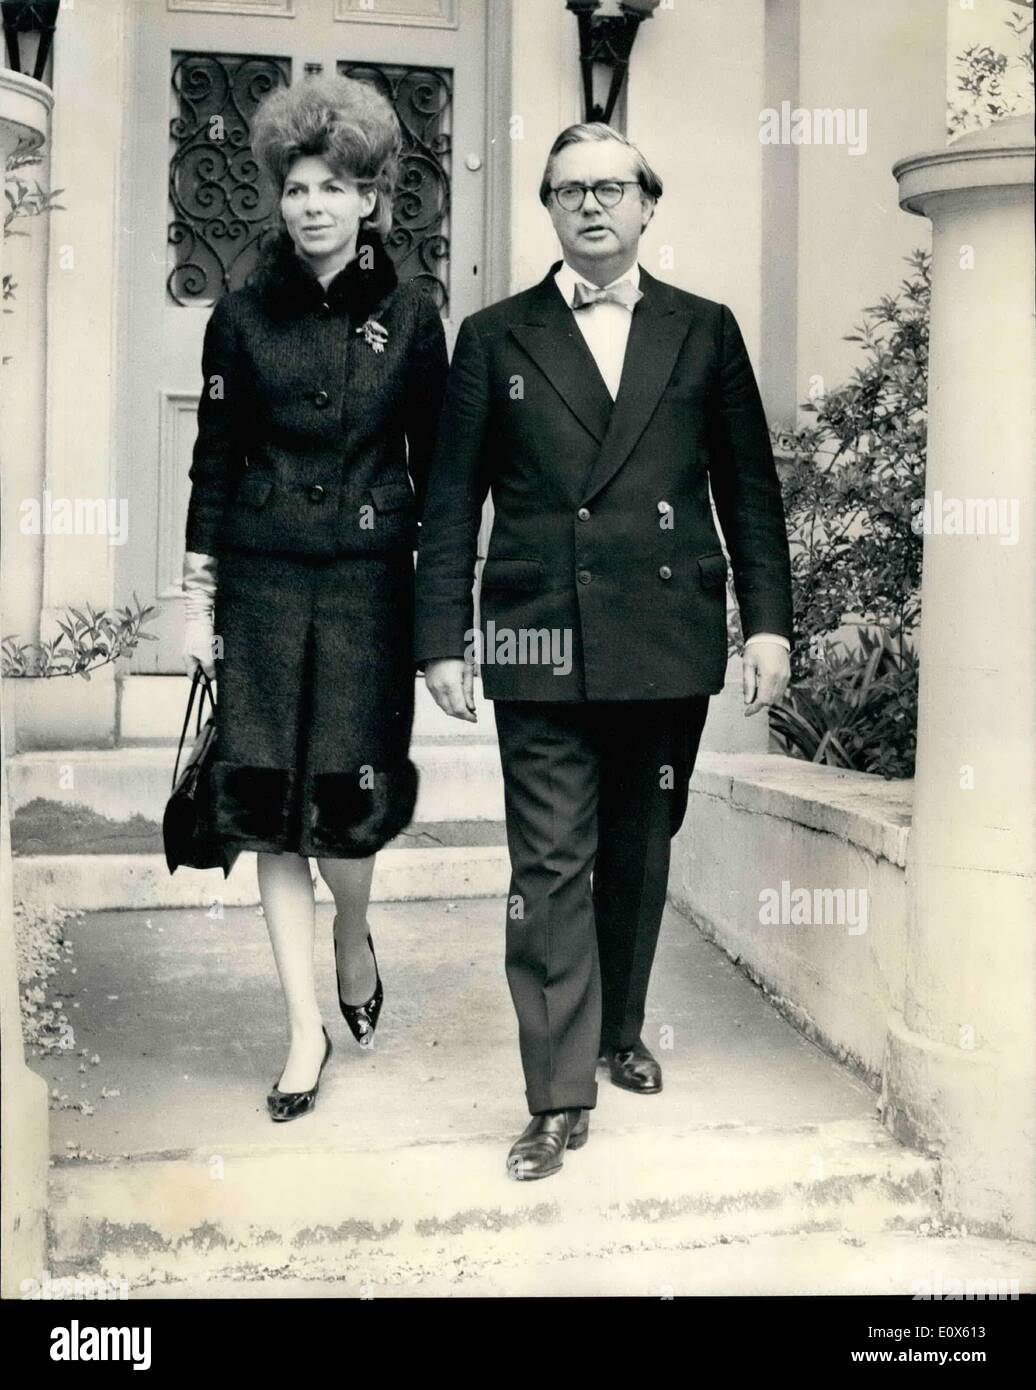 May 05, 1965 - Woodrow Wyatt, labour steel rebel leaves for the house. Photo shows:  Labour's steel rebel Mr. Woodrow Wyatt, pictured with his wife, as they left for the house of commons, where the parliamentary vote on the nationalism of steel takes place tonight. Stock Photo